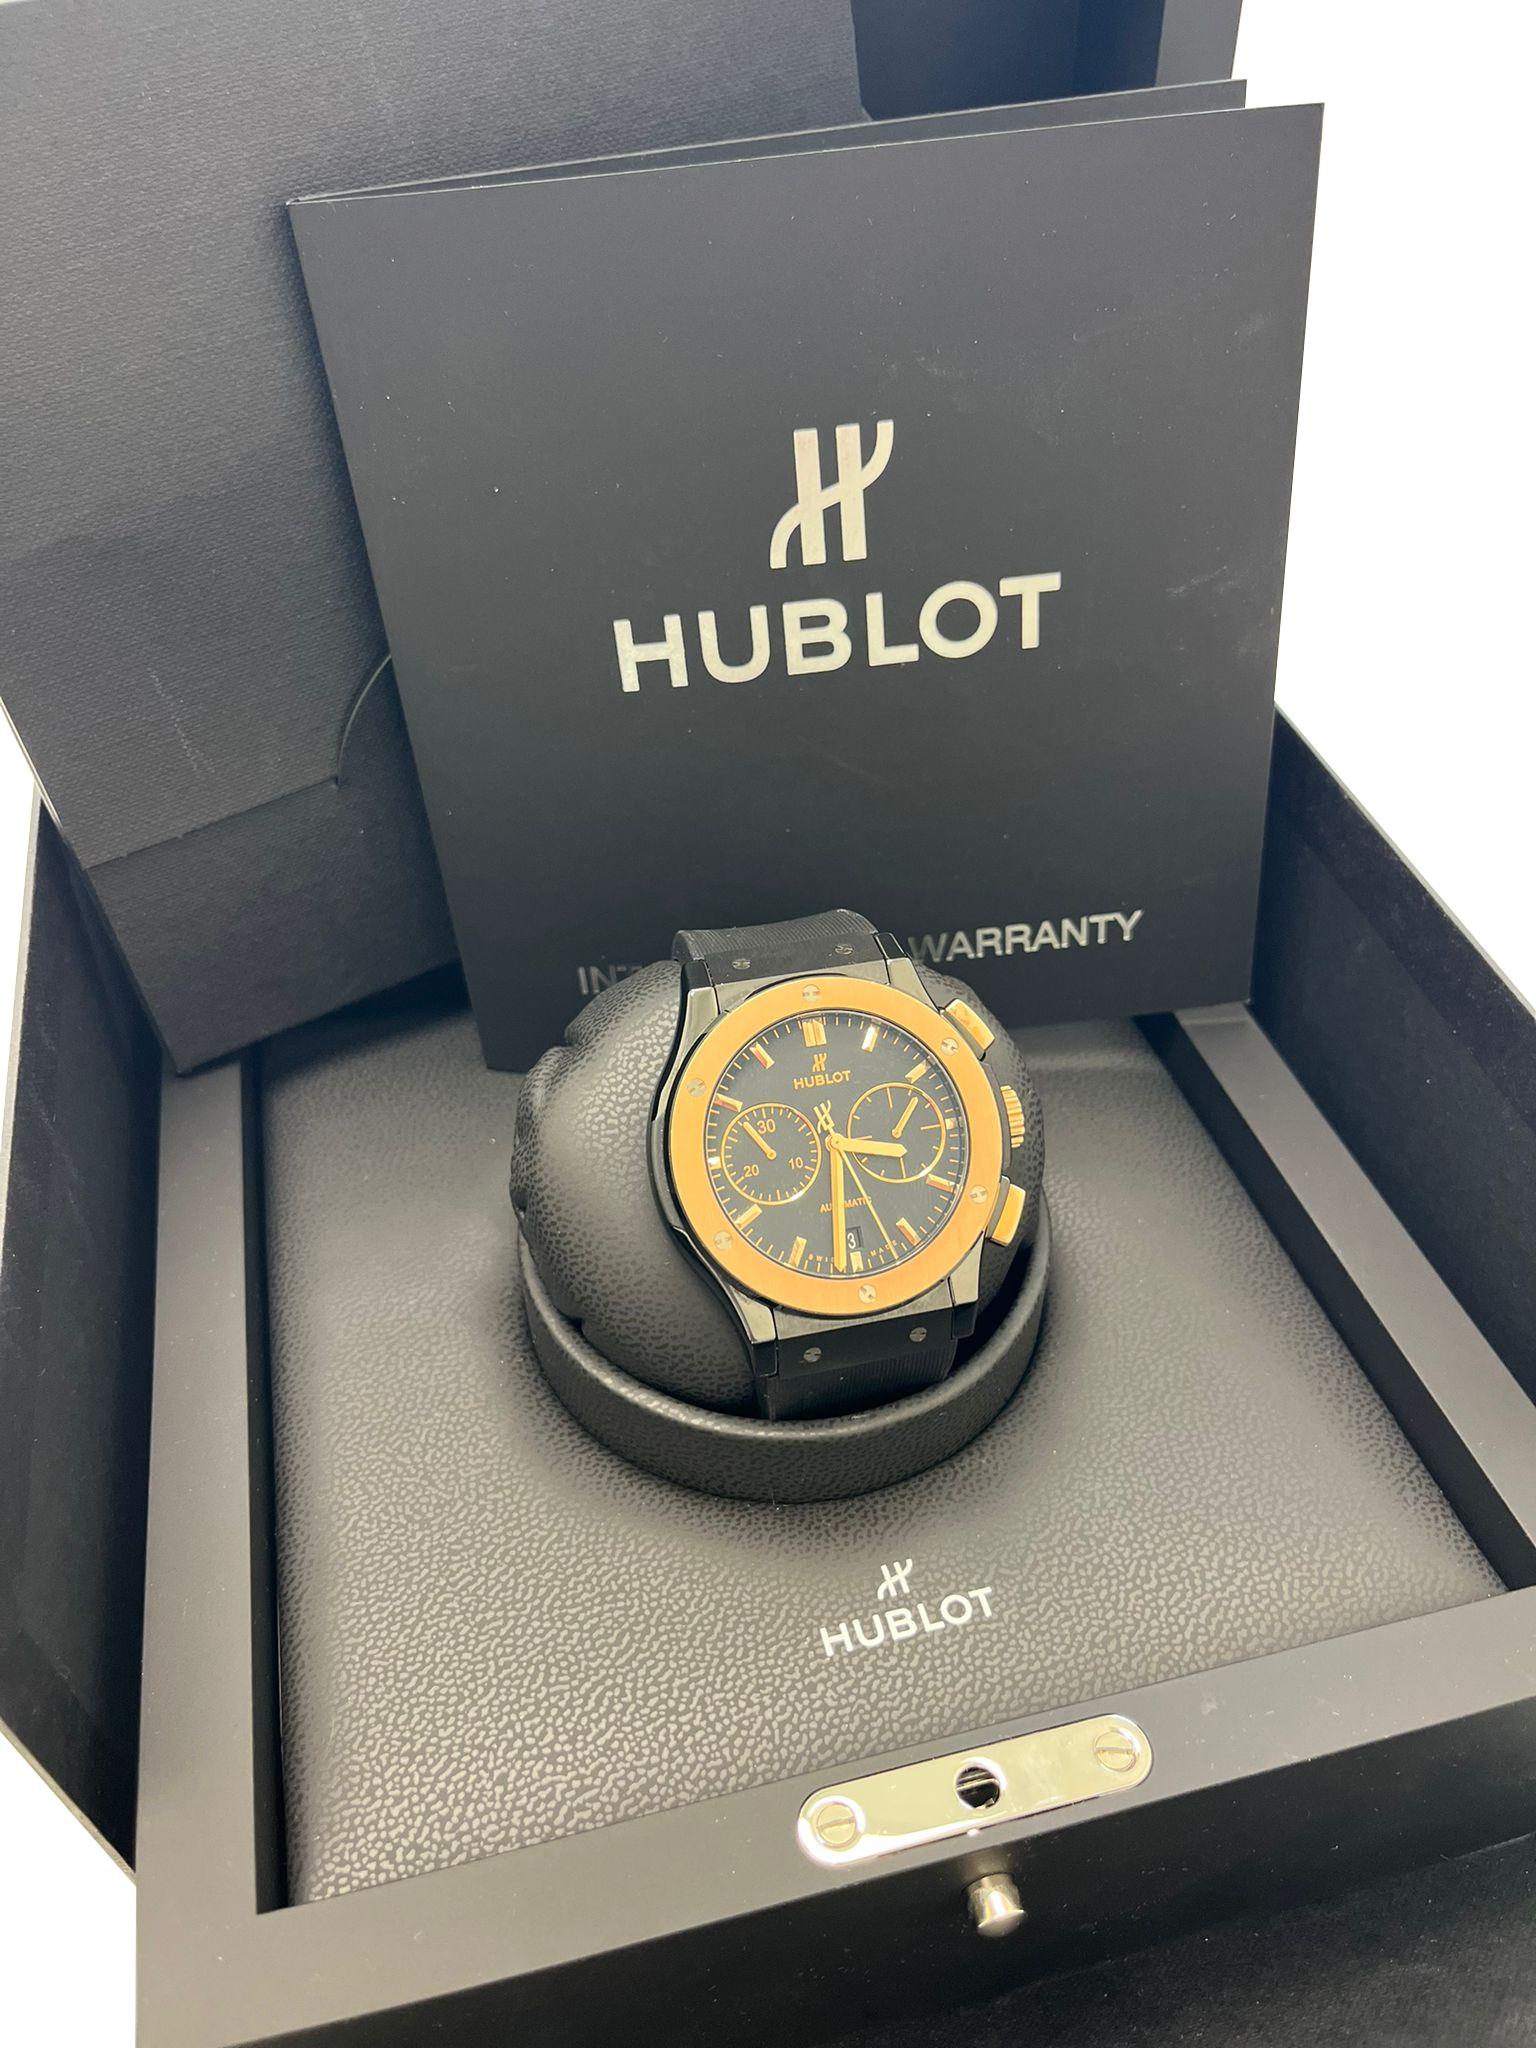 Hublot Classic Fusion Chronograph Ceramic King Gold 45mm Watch 521.CO.1181.RX For Sale 5